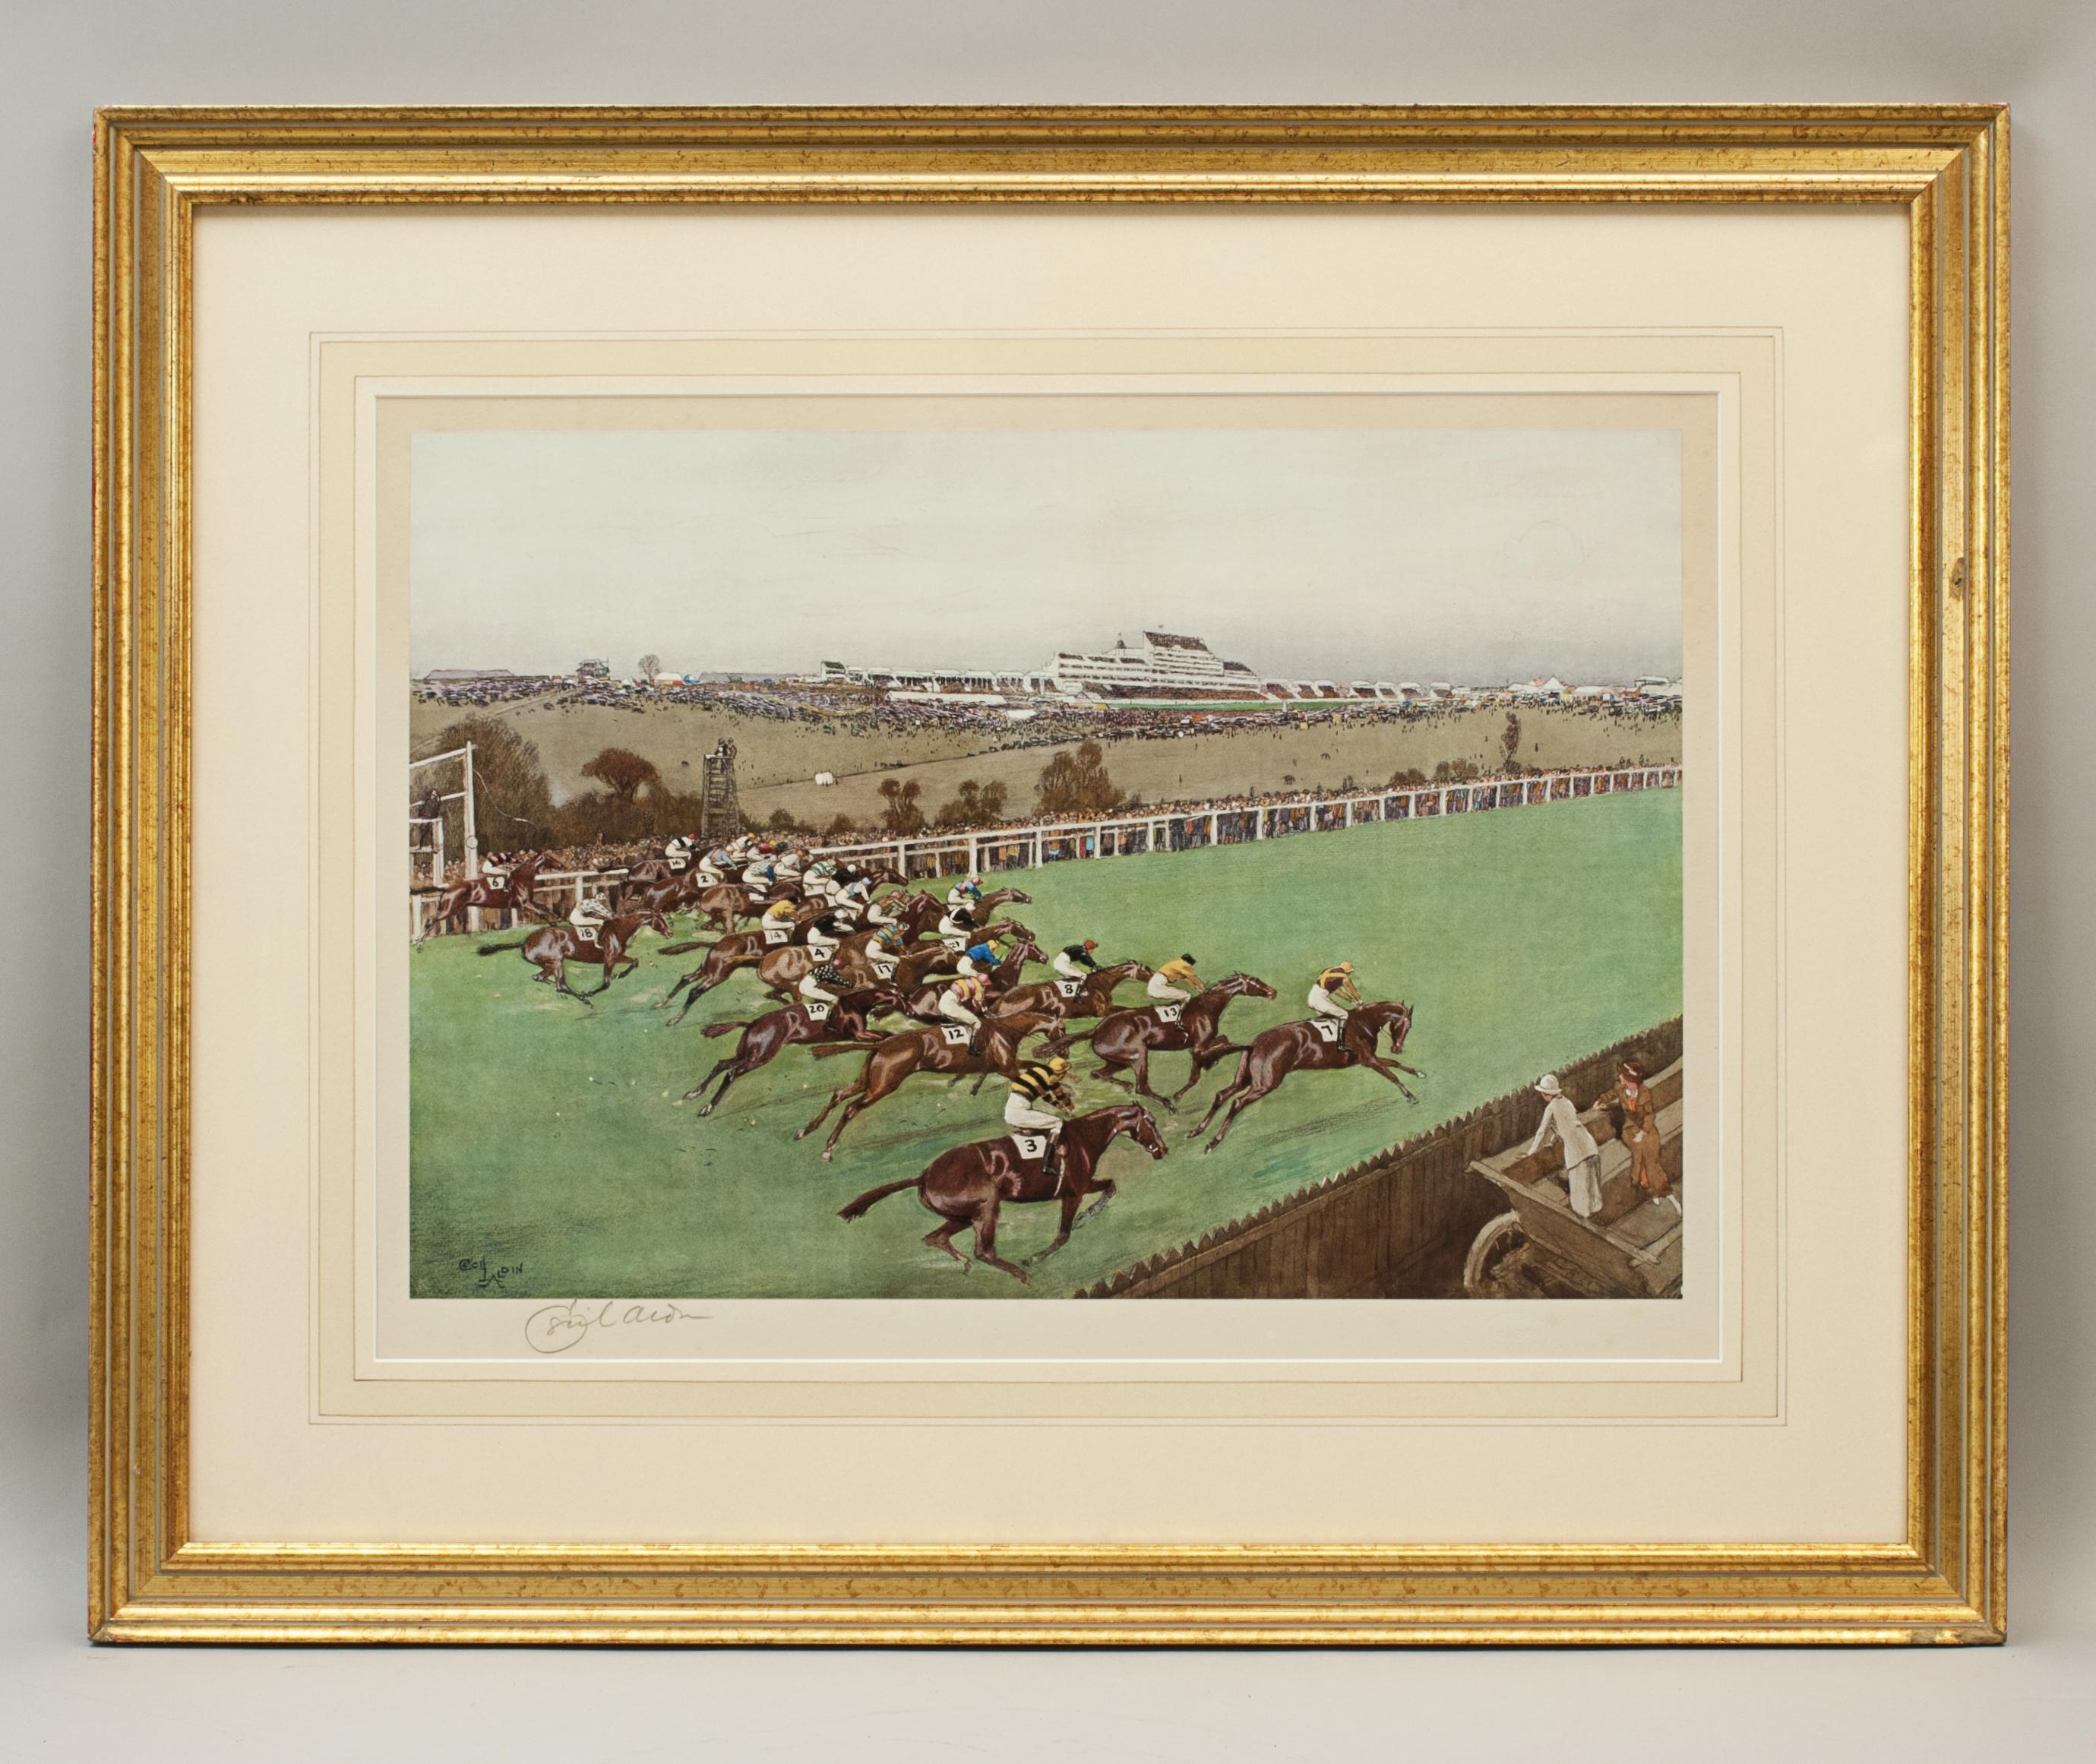 Pair of Cecil Aldin horse racing prints start and finish.
A pair of horse racing photolithographs by Cecil Aldin 